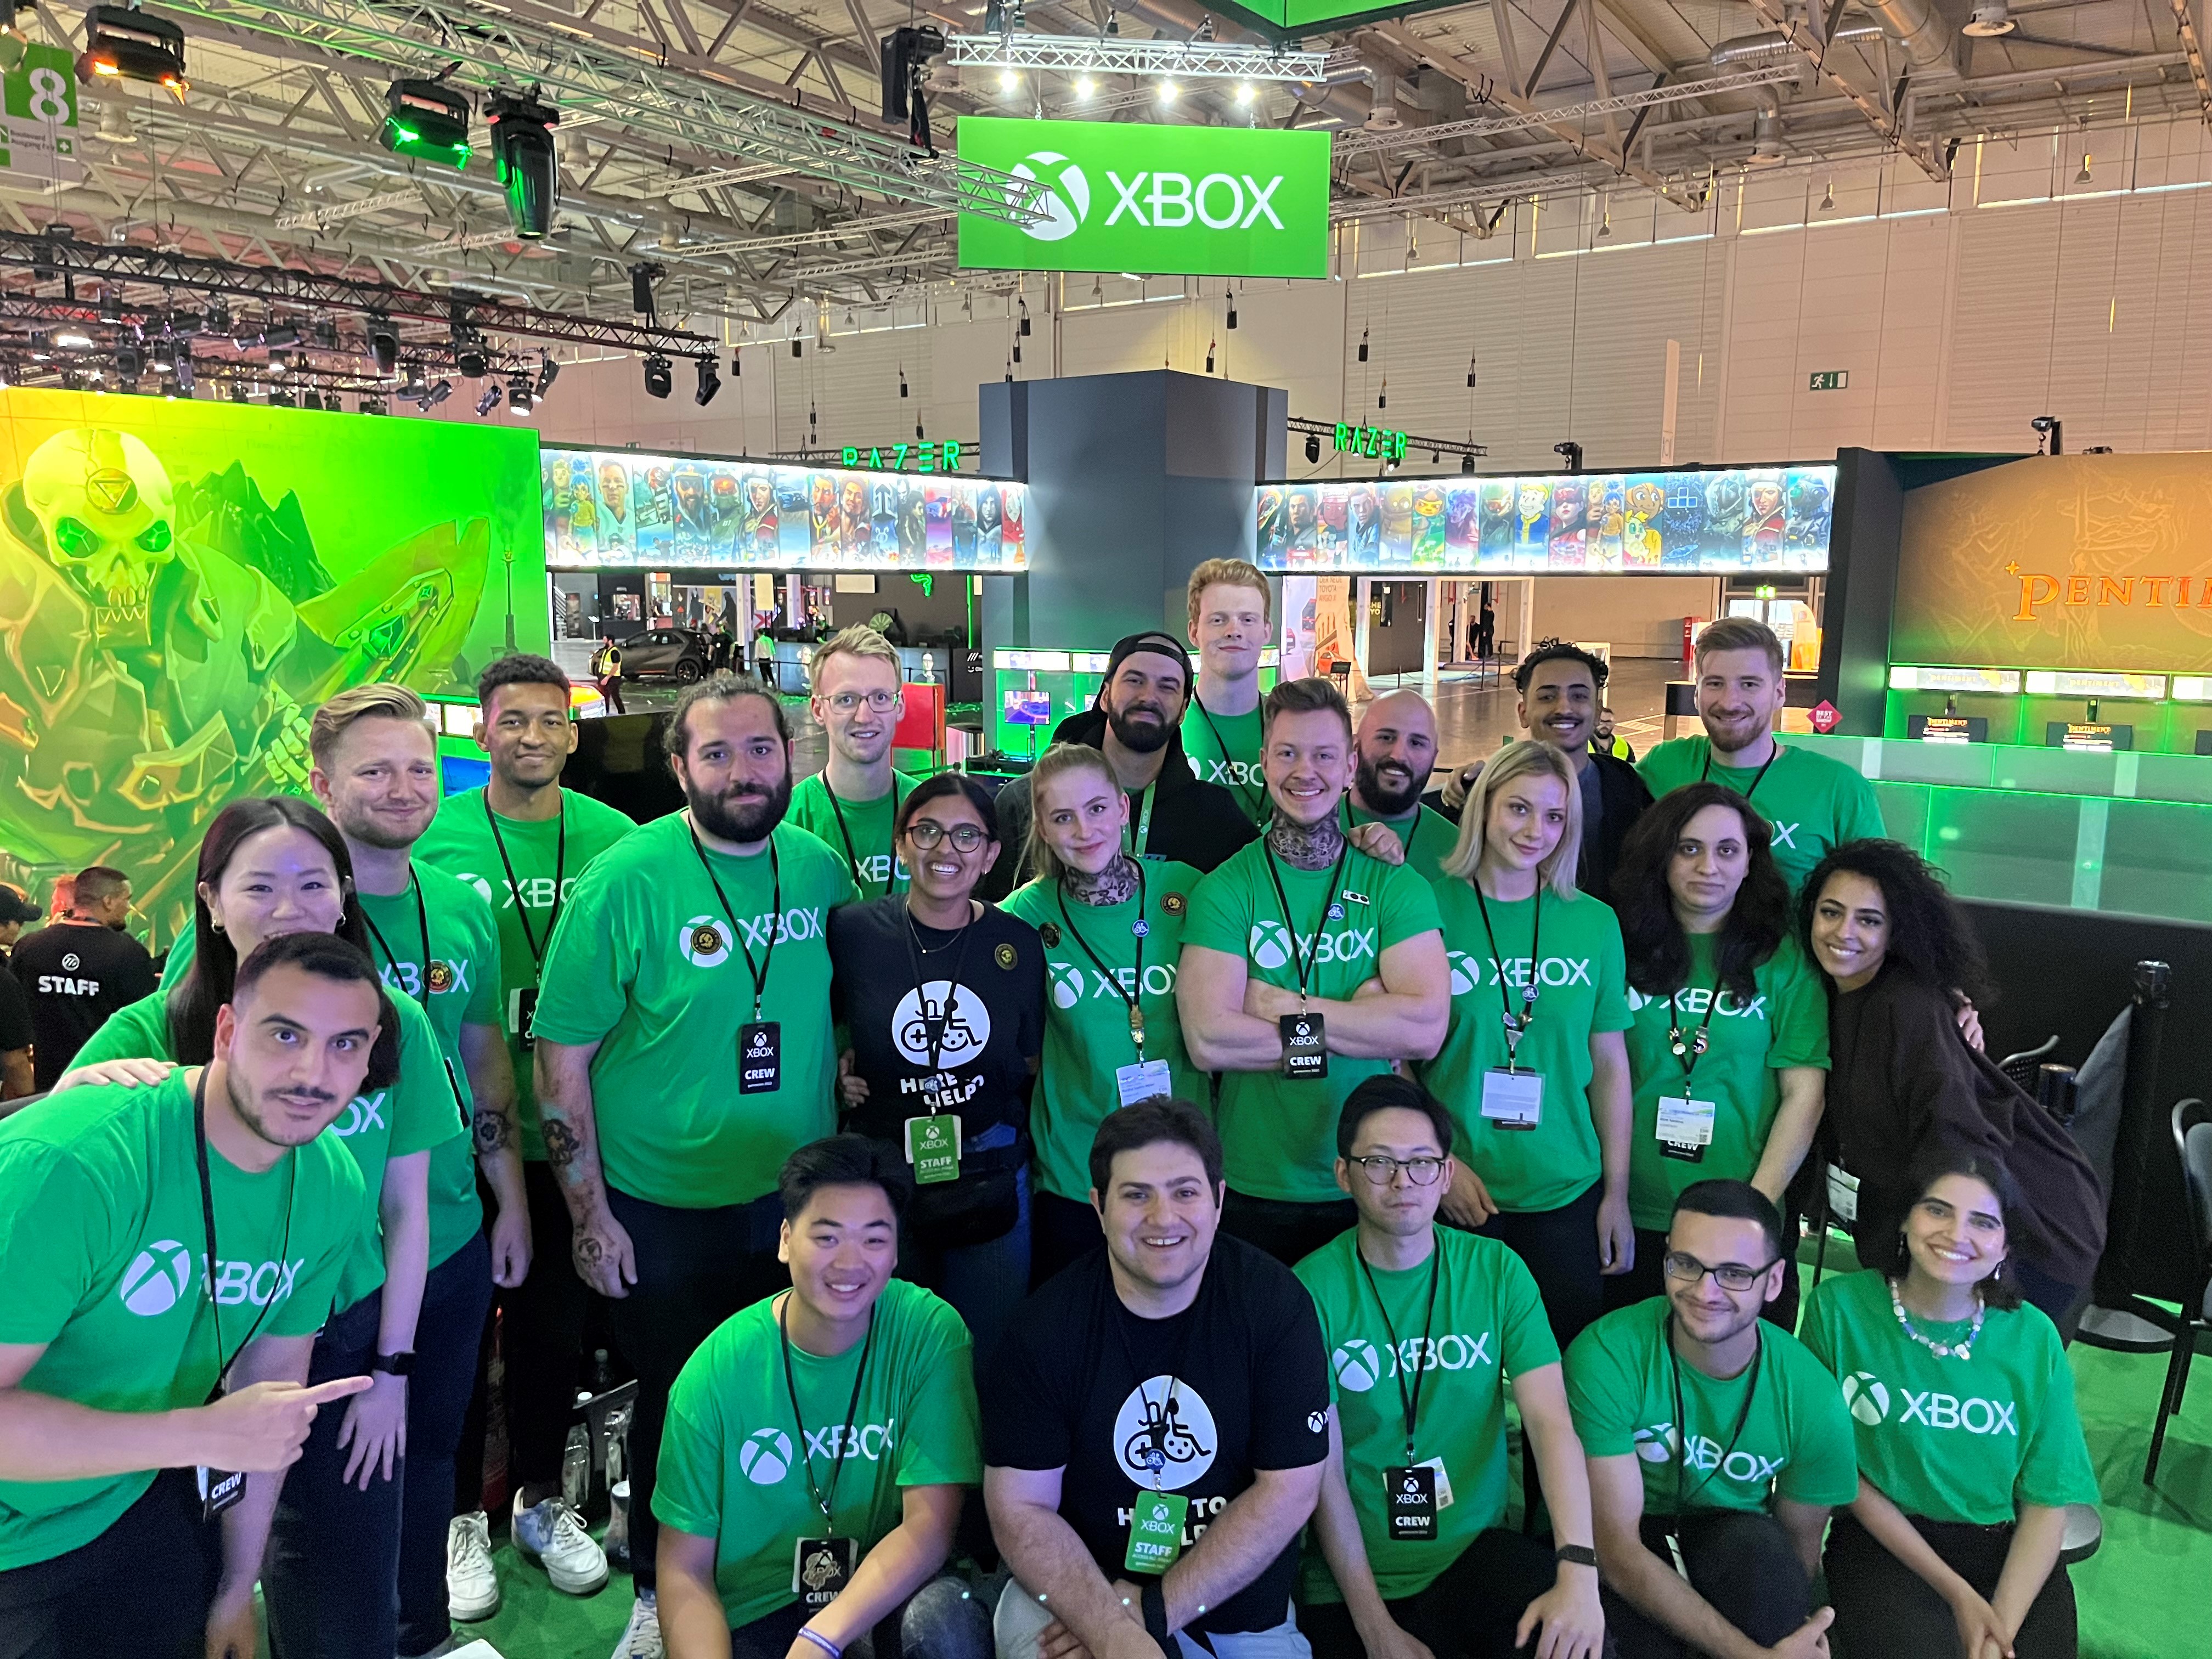 A large group of individuals wearing green and black Xbox shirts stand in an Xbox booth."